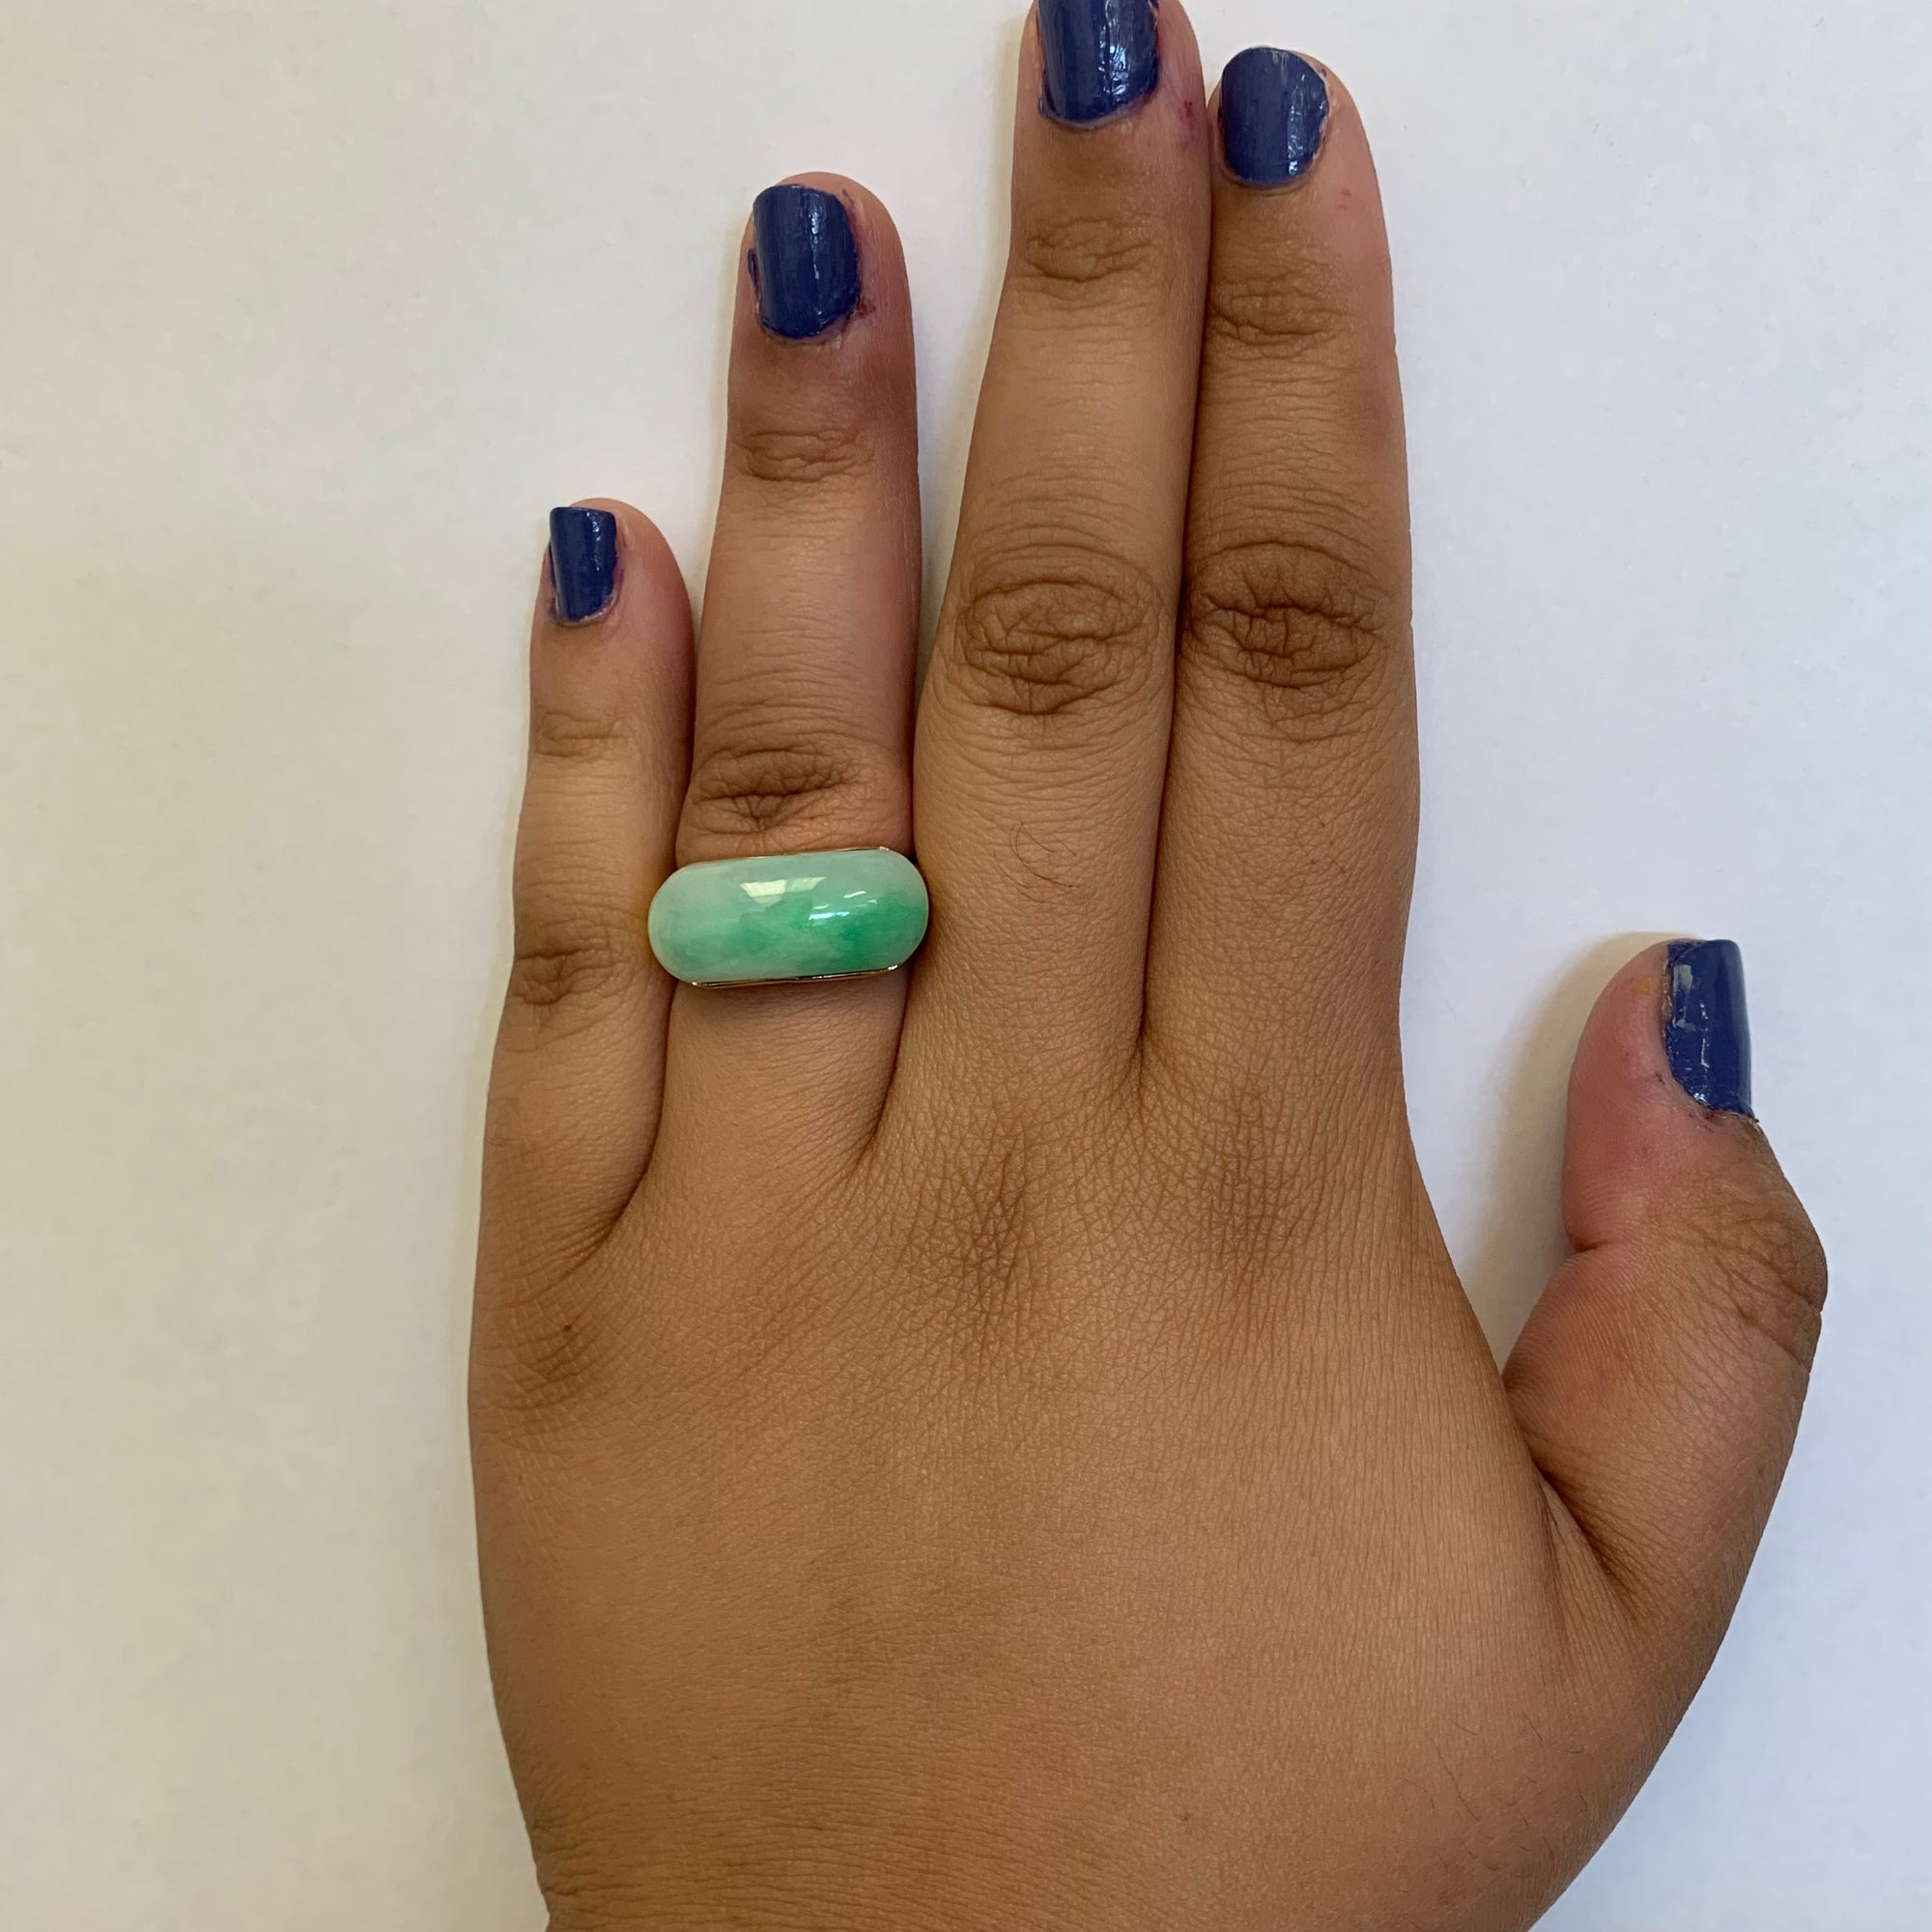 Curved Jadeite Cabochon Ring | 8.00ct | SZ 8.5 |